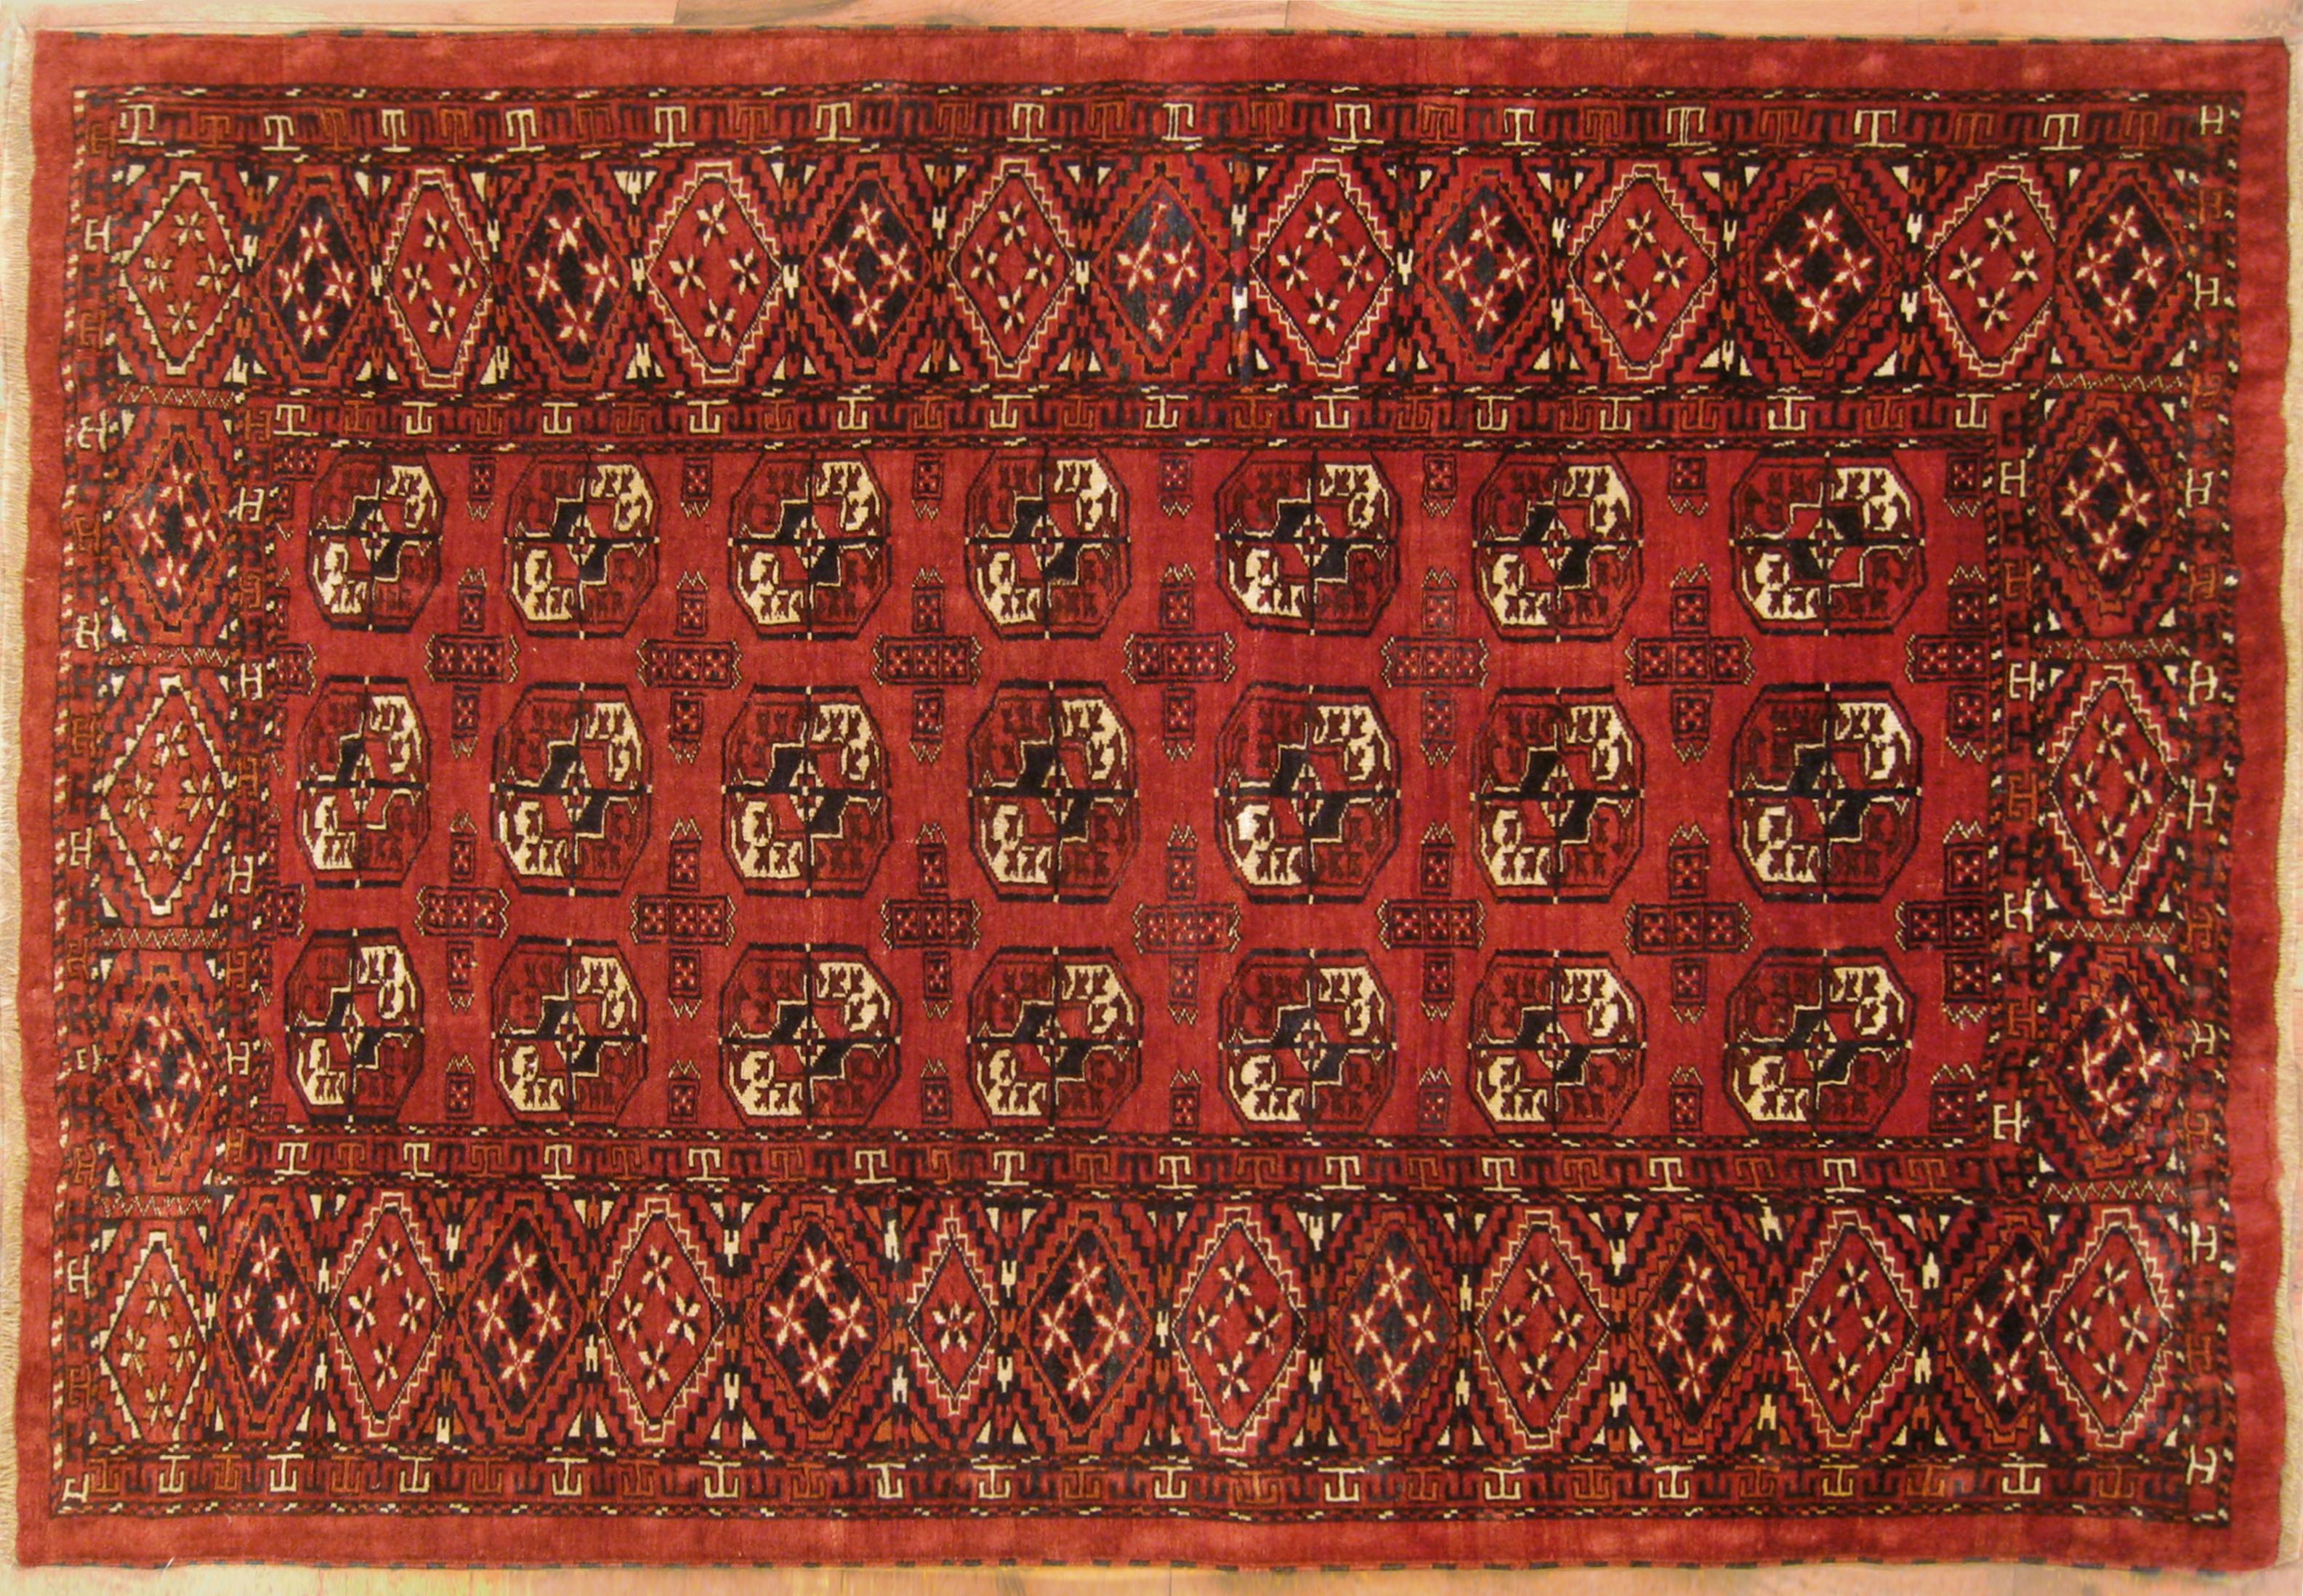 Antique Turkestan Turkman Rug, Small size, circa 1900

A one-of-a-kind antique Turkestan Turkman Oriental Carpet, hand-knotted with soft wool pile. This geometric carpet features a repeating design allover the red primary field, with a blue outer